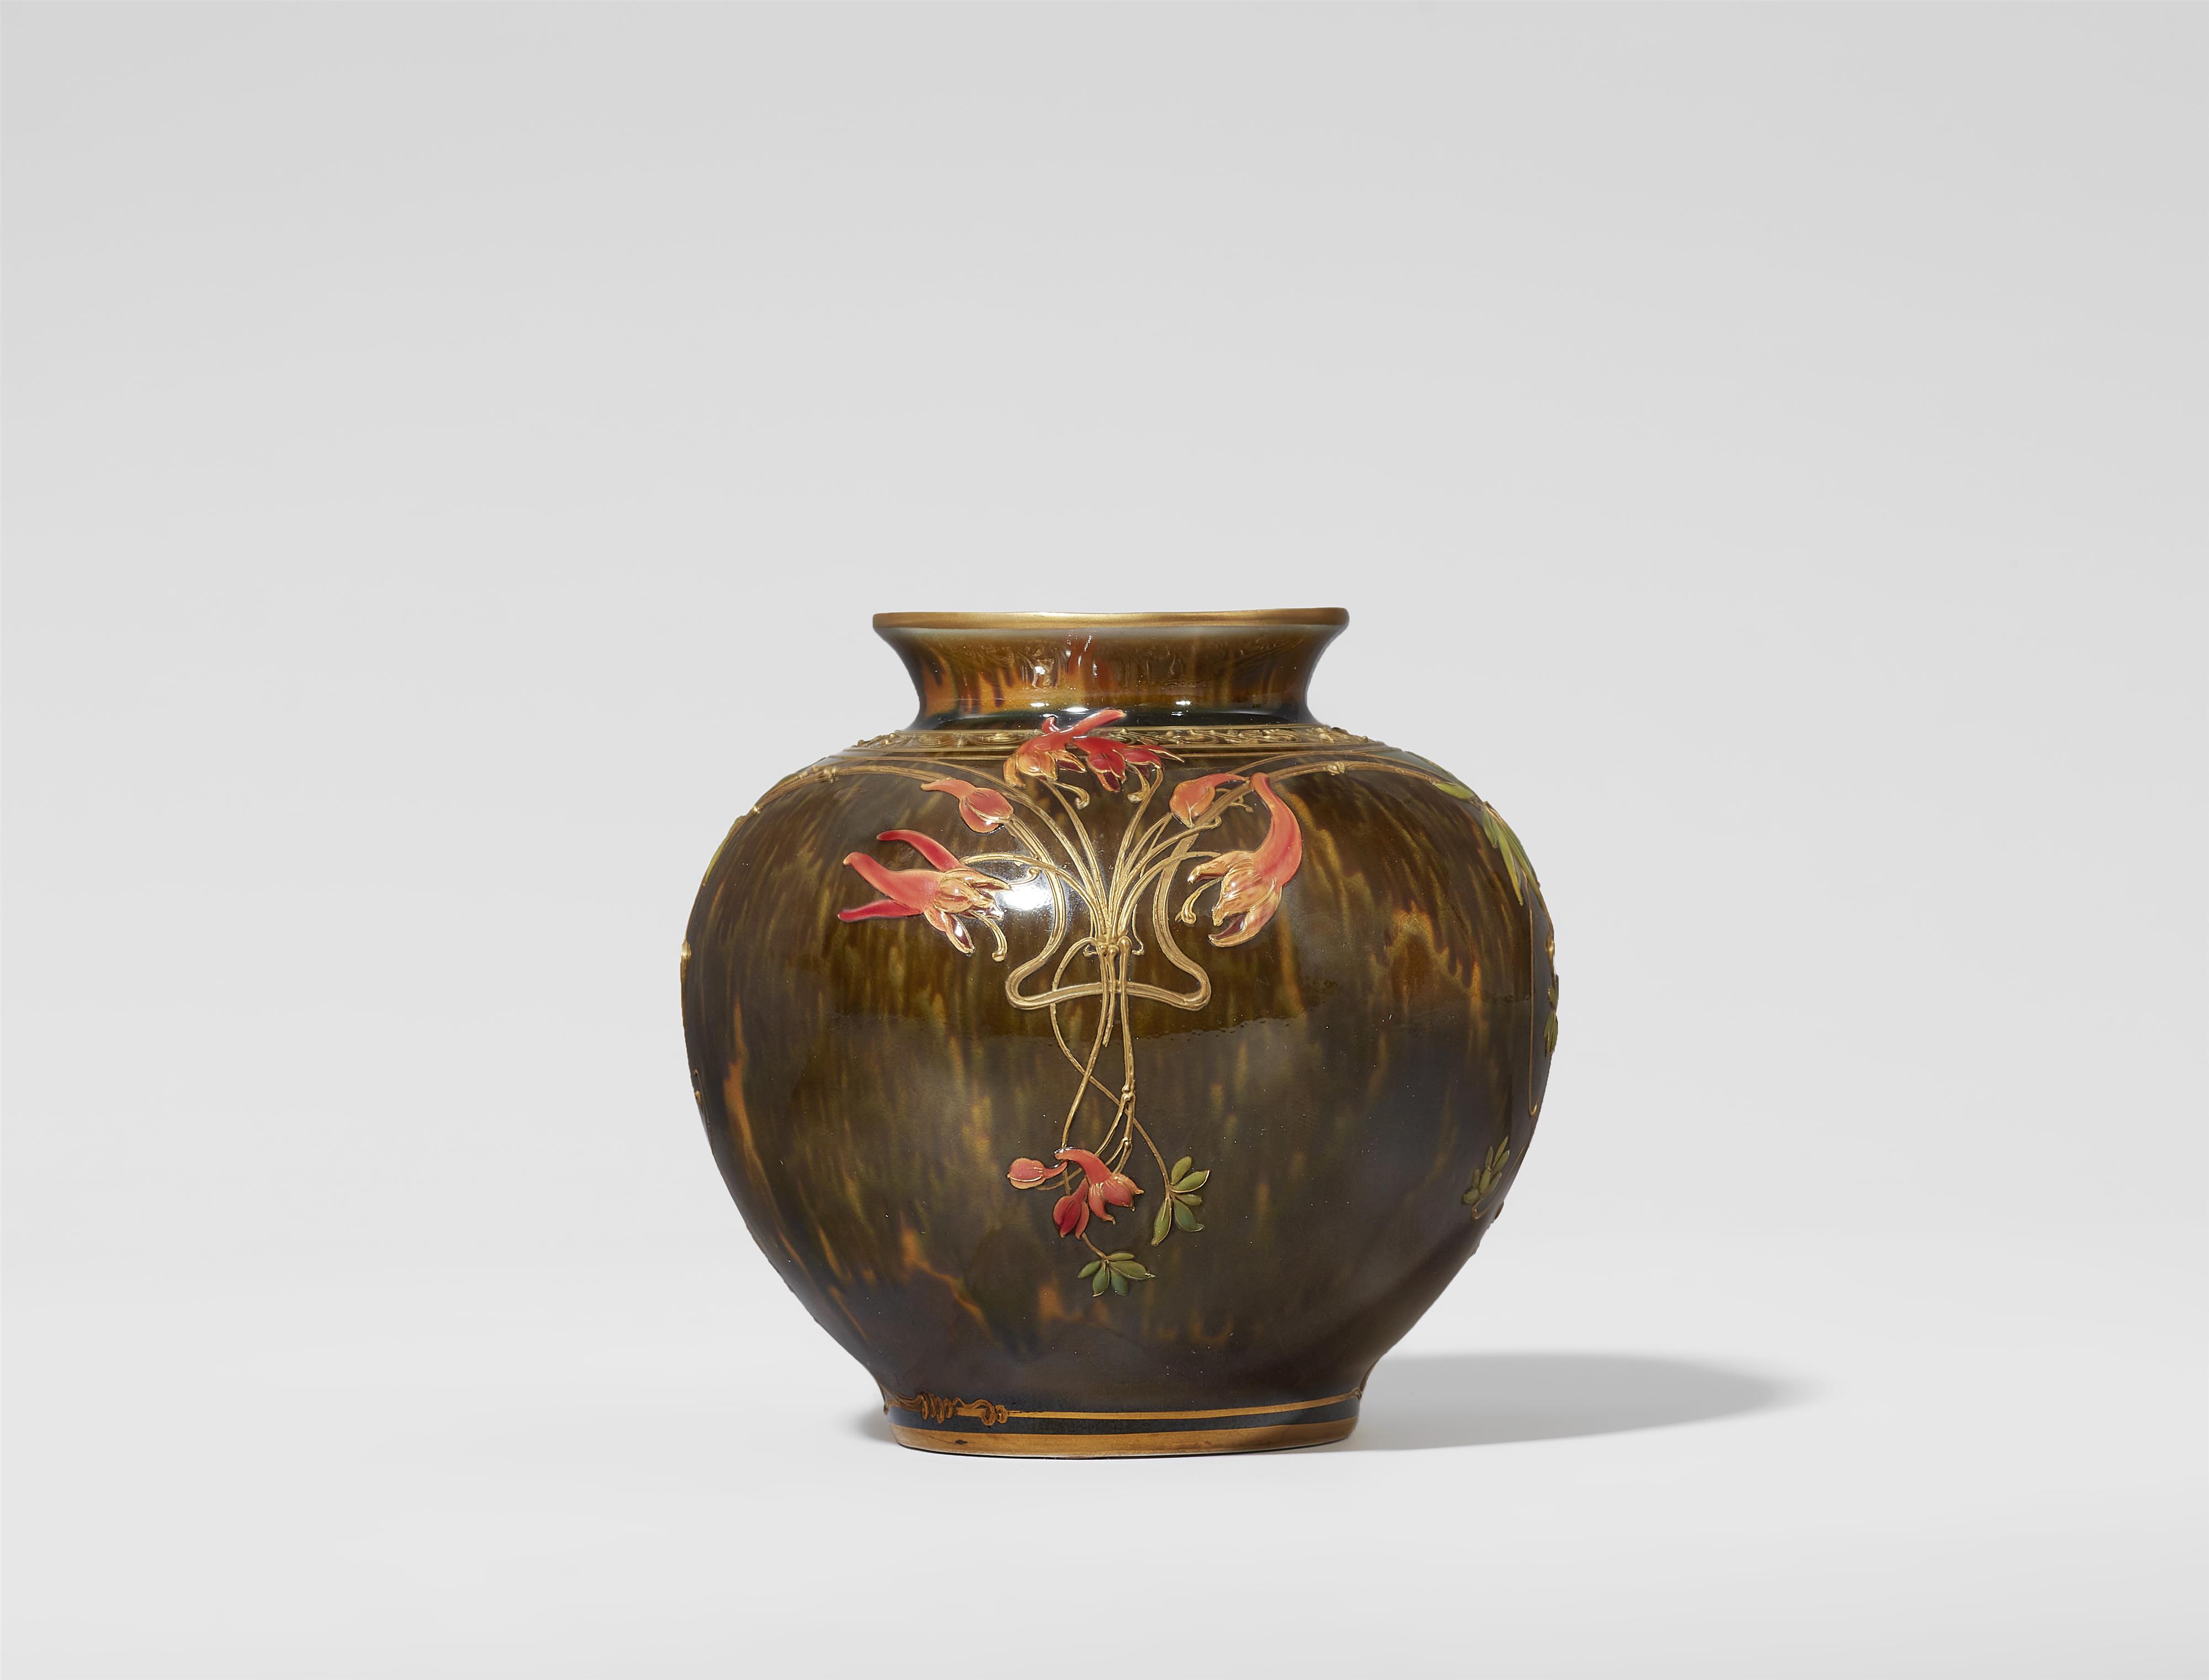 A Berlin KPM porcelain vase with hare furs glaze and fuchsia flowers in relief - image-1